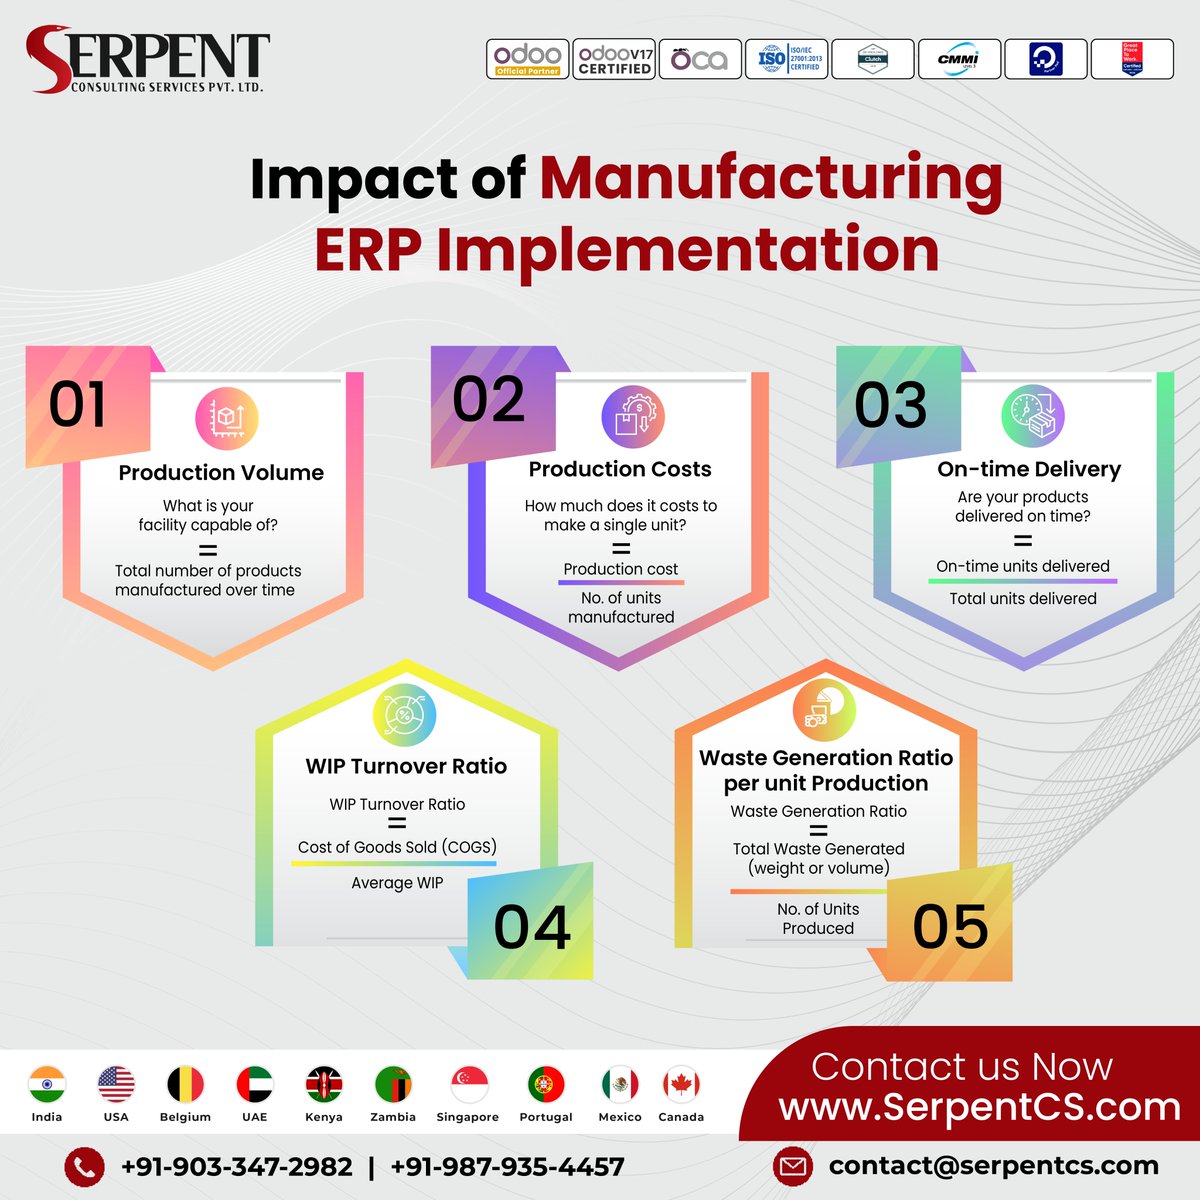 Ready to see a dramatic improvement in on-time deliveries and reduced production costs? Discover how a #ManufacturingERP can elevate your #KPIs.

📧 contact@serpentcs.com  

Contact us now! +91-9879354457 / +91-9033472982

#manufacturing #ERP #software #ManufacturingIndustry